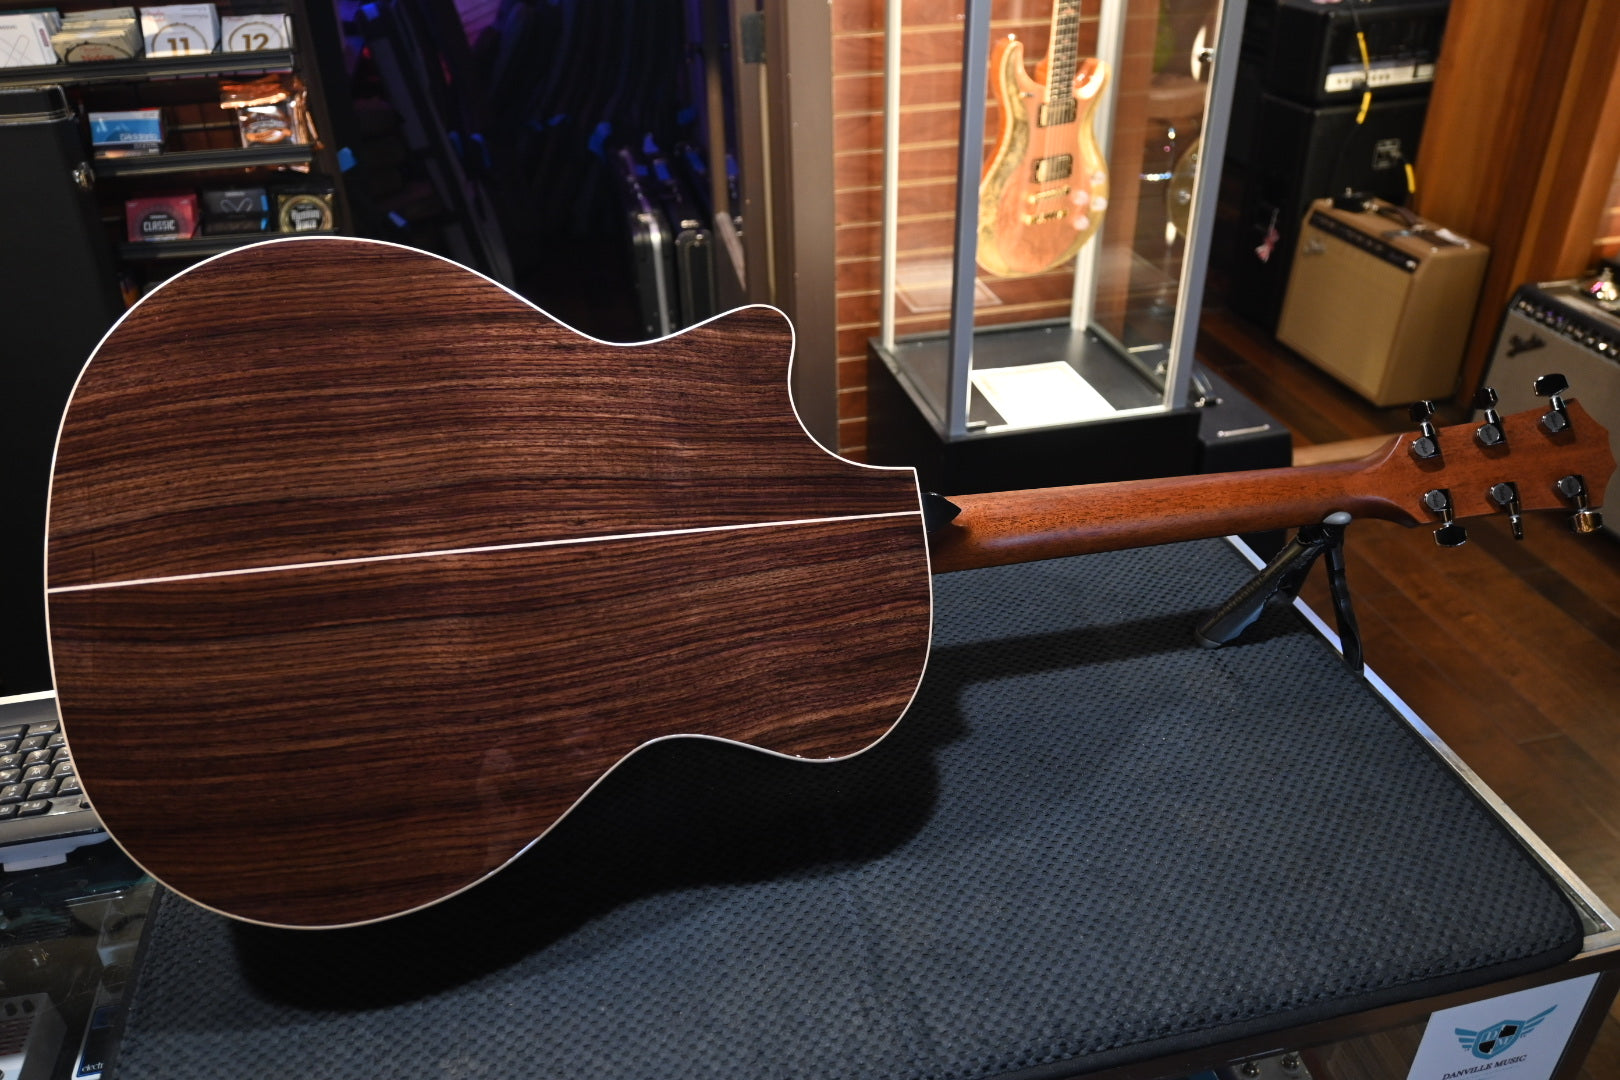 Taylor Builder’s Edition 814ce - Blacktop Guitar #3041 w/ Taylor buy one get a GS Mini for $199 Promo! - Danville Music